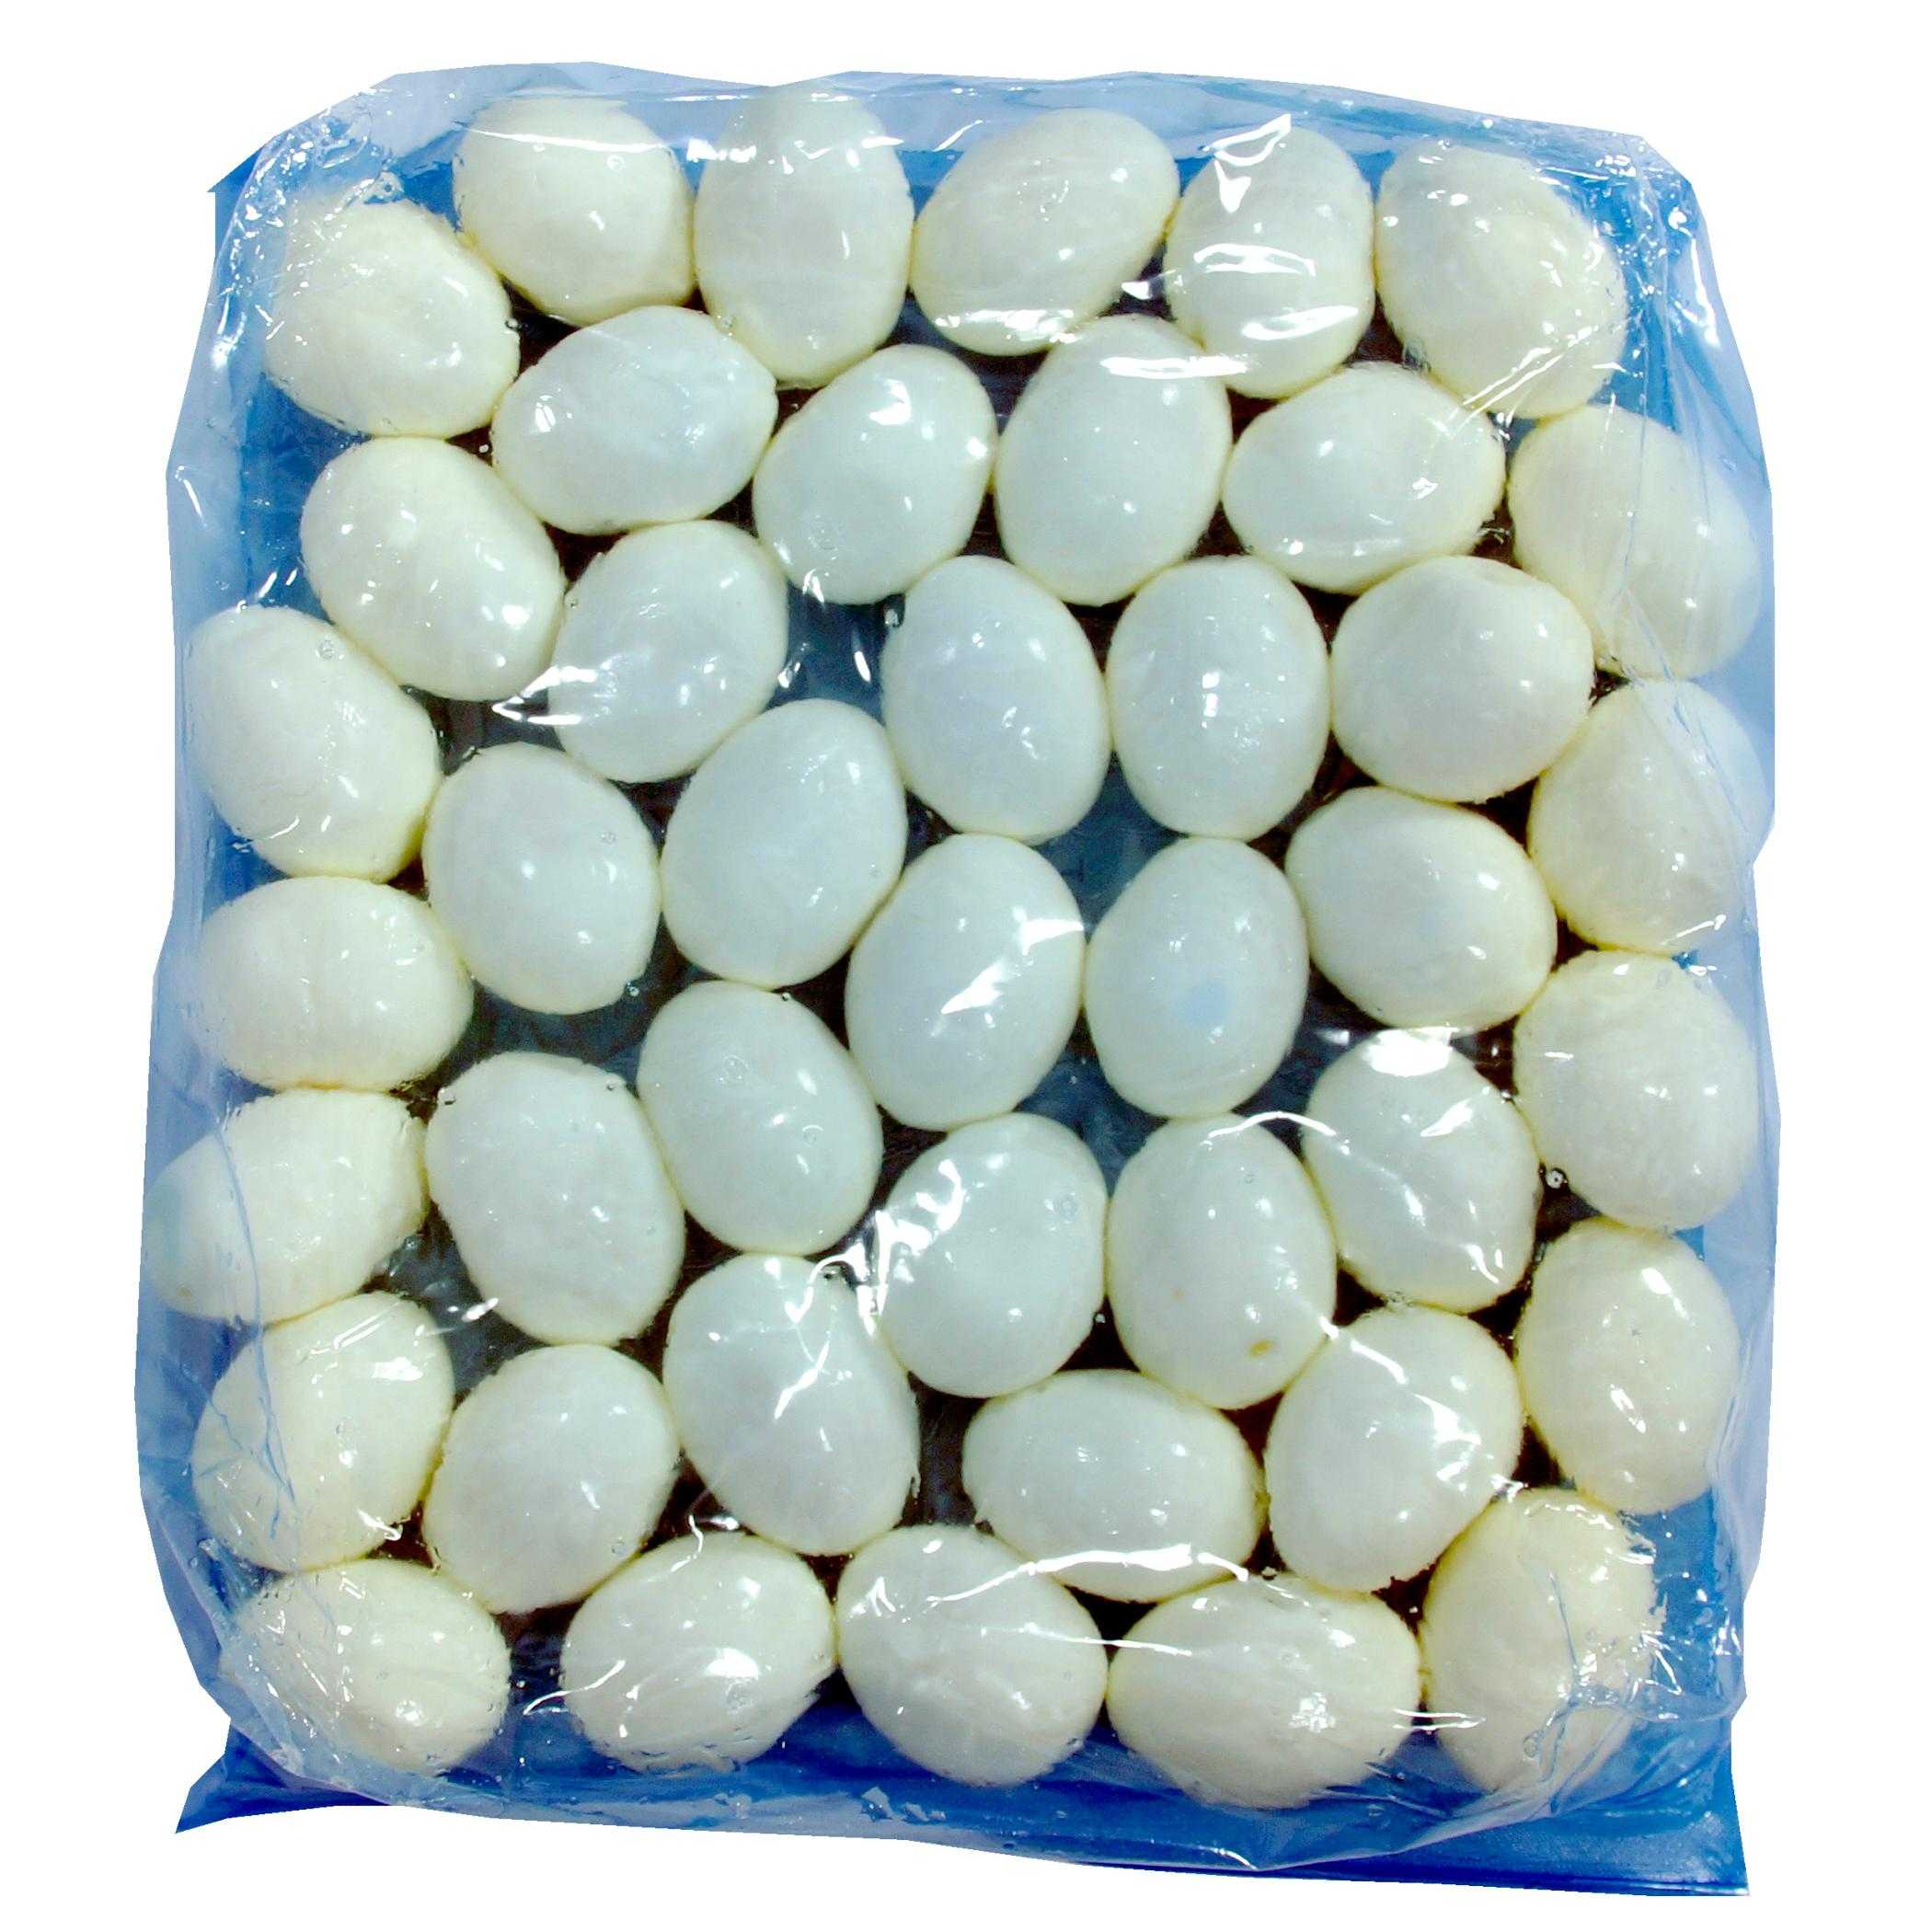 Papetti’s® Refrigerated Peeled Hard Cooked Eggs, With Blue Liner, 4/5 Lb Bag Dry Pack